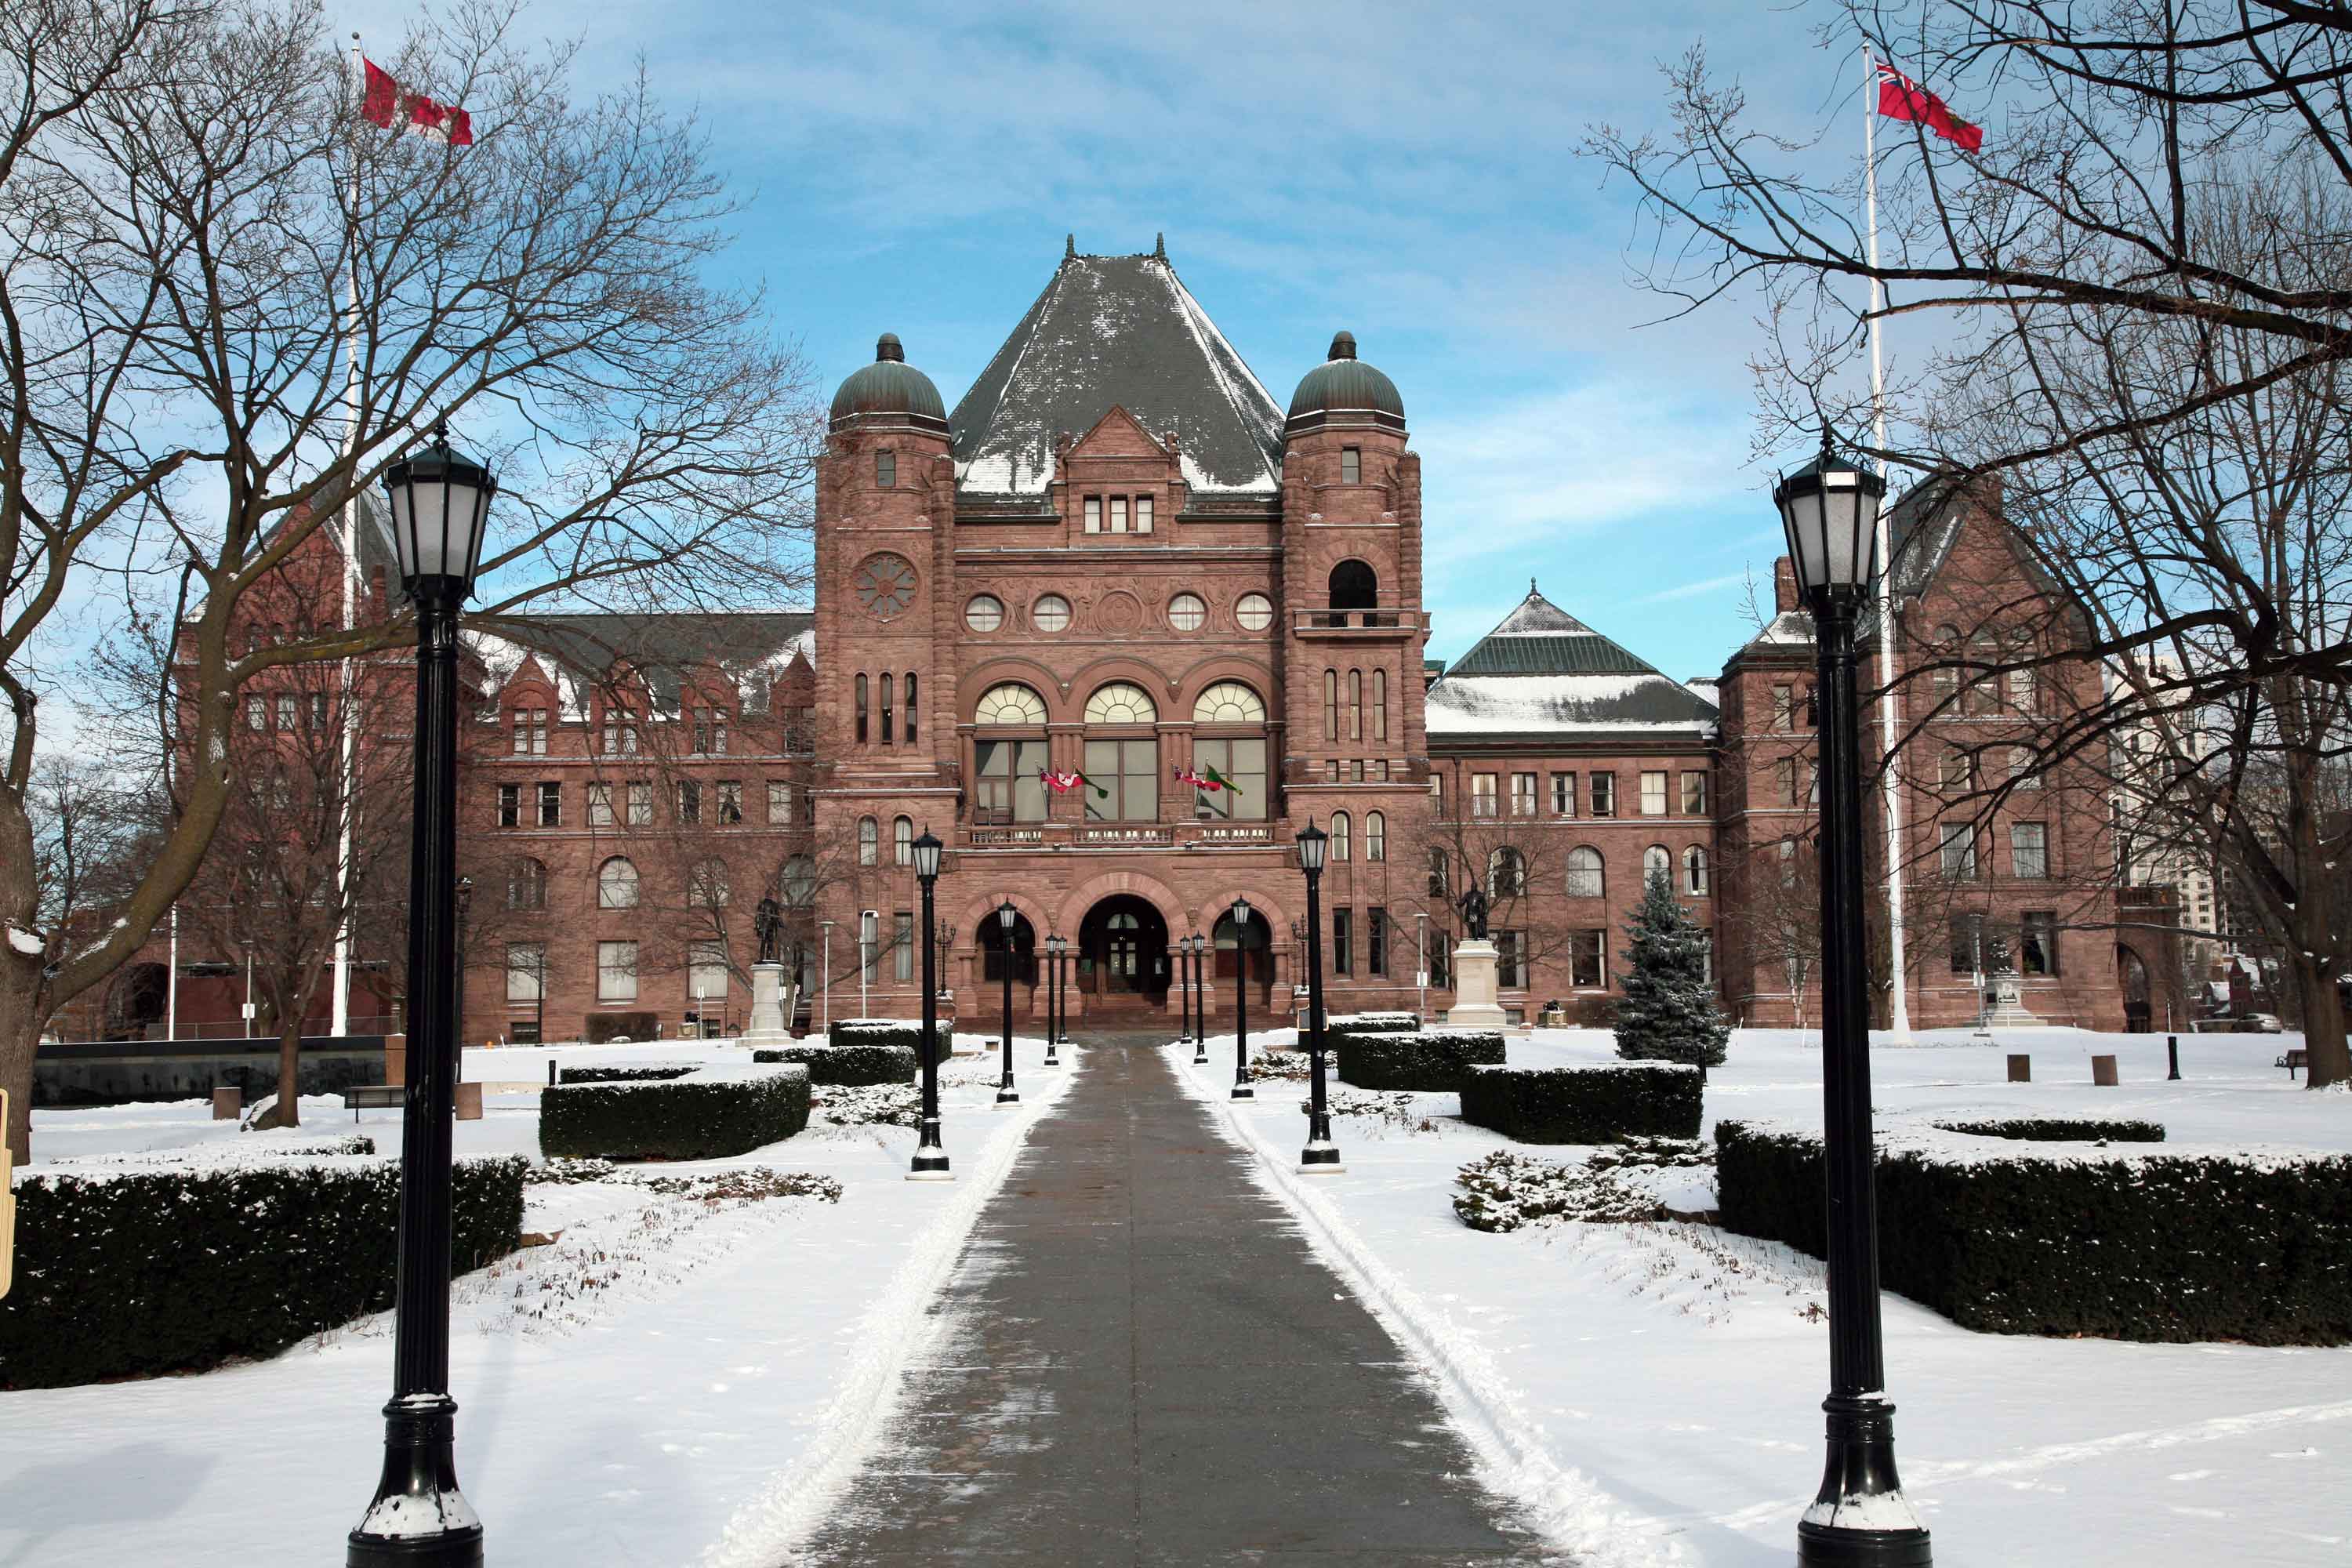 A front view of the Legislative building in winter surrounded by snow.